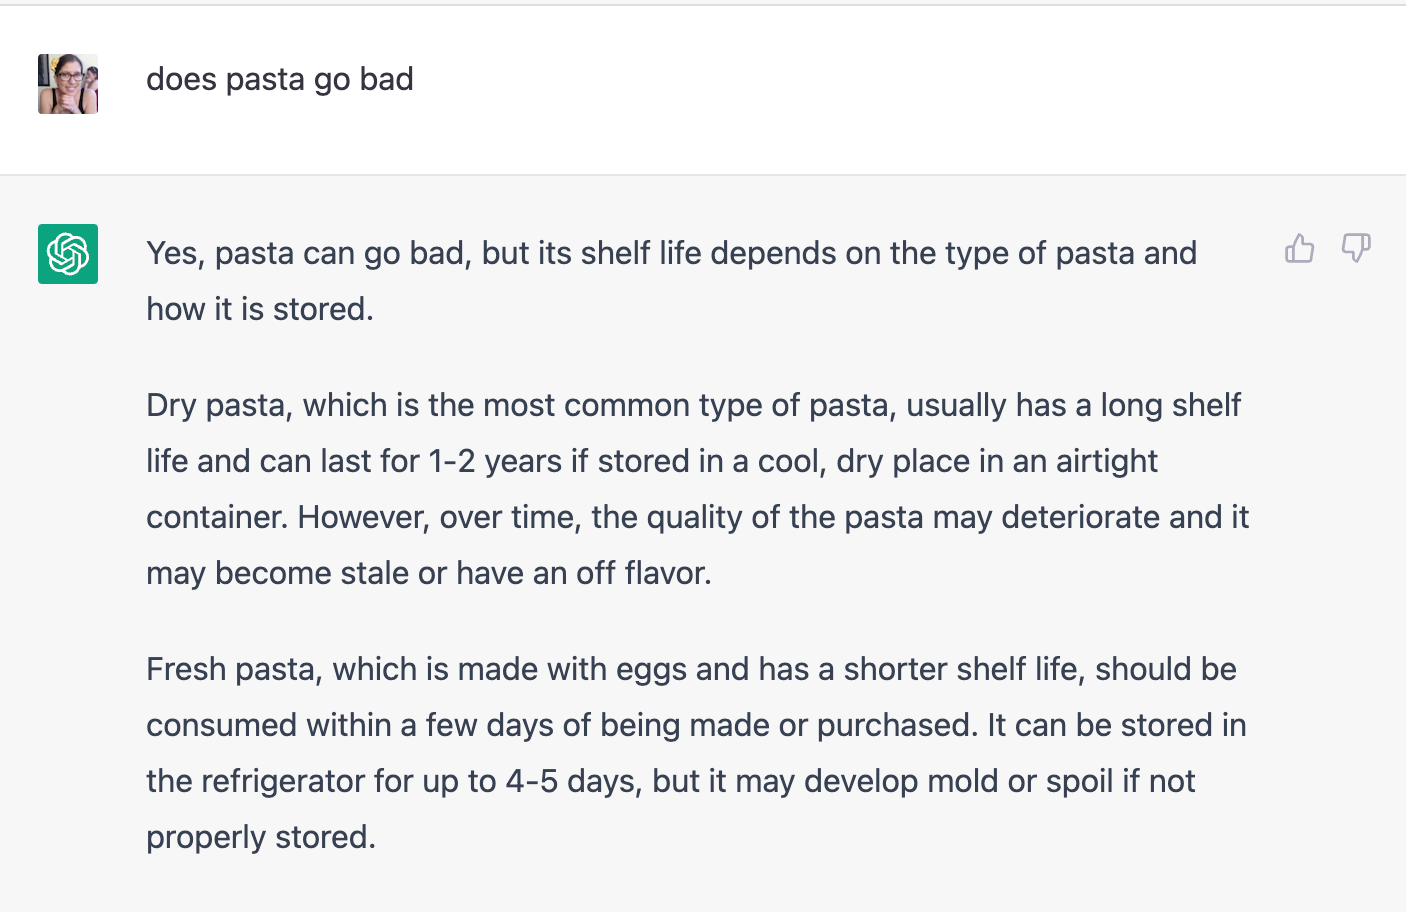 i ask chat gpt "does pasta go bad" and it says dry pasta has a shelf life of 1-2 years and fresh pasta has a (refrigerated) shelf-life of 4-5 days)